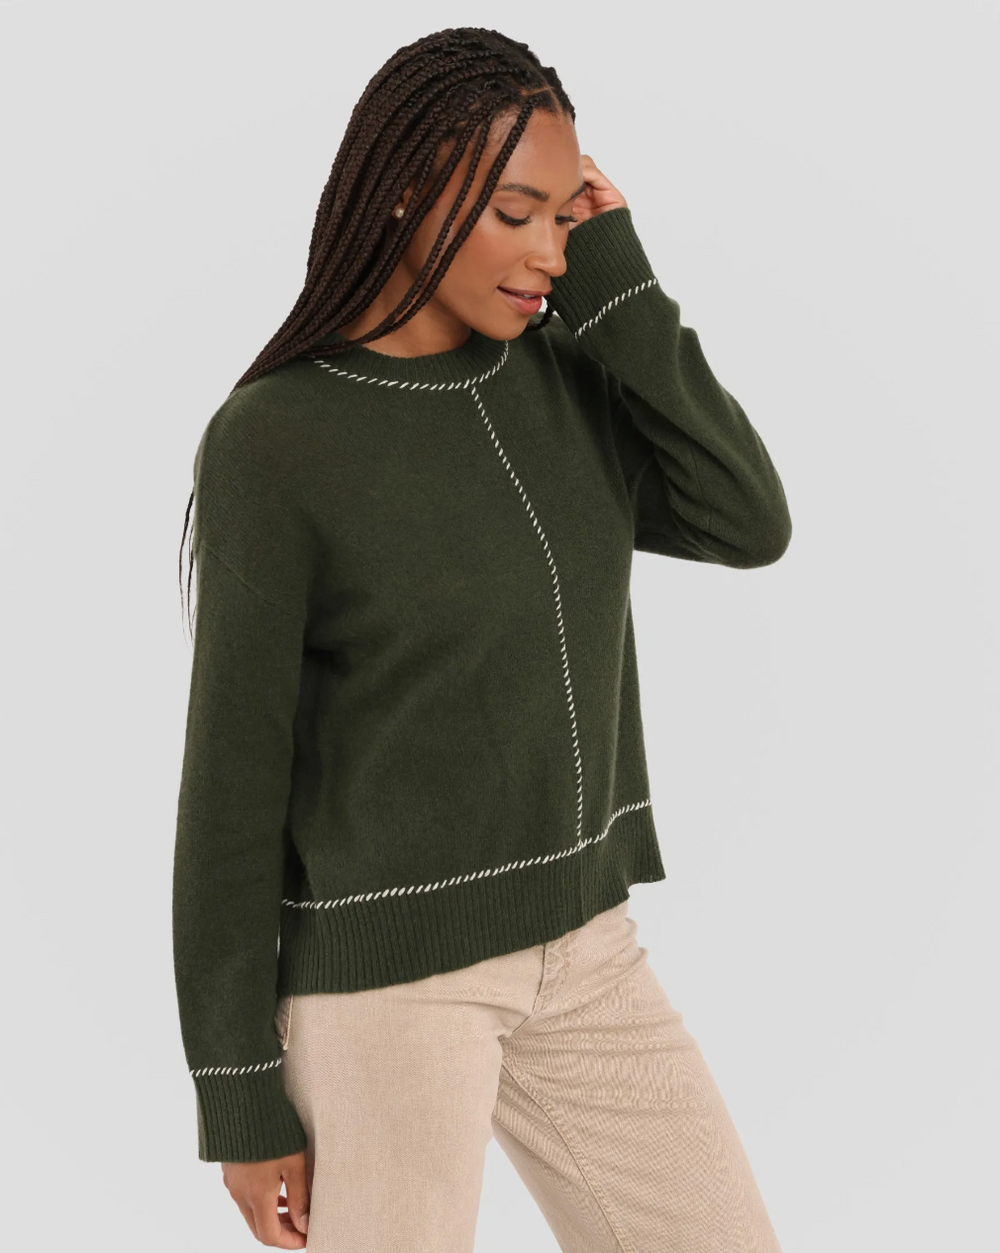 Alashan sweater, cashmere whip-stitch relaxed SALE Size L/XL